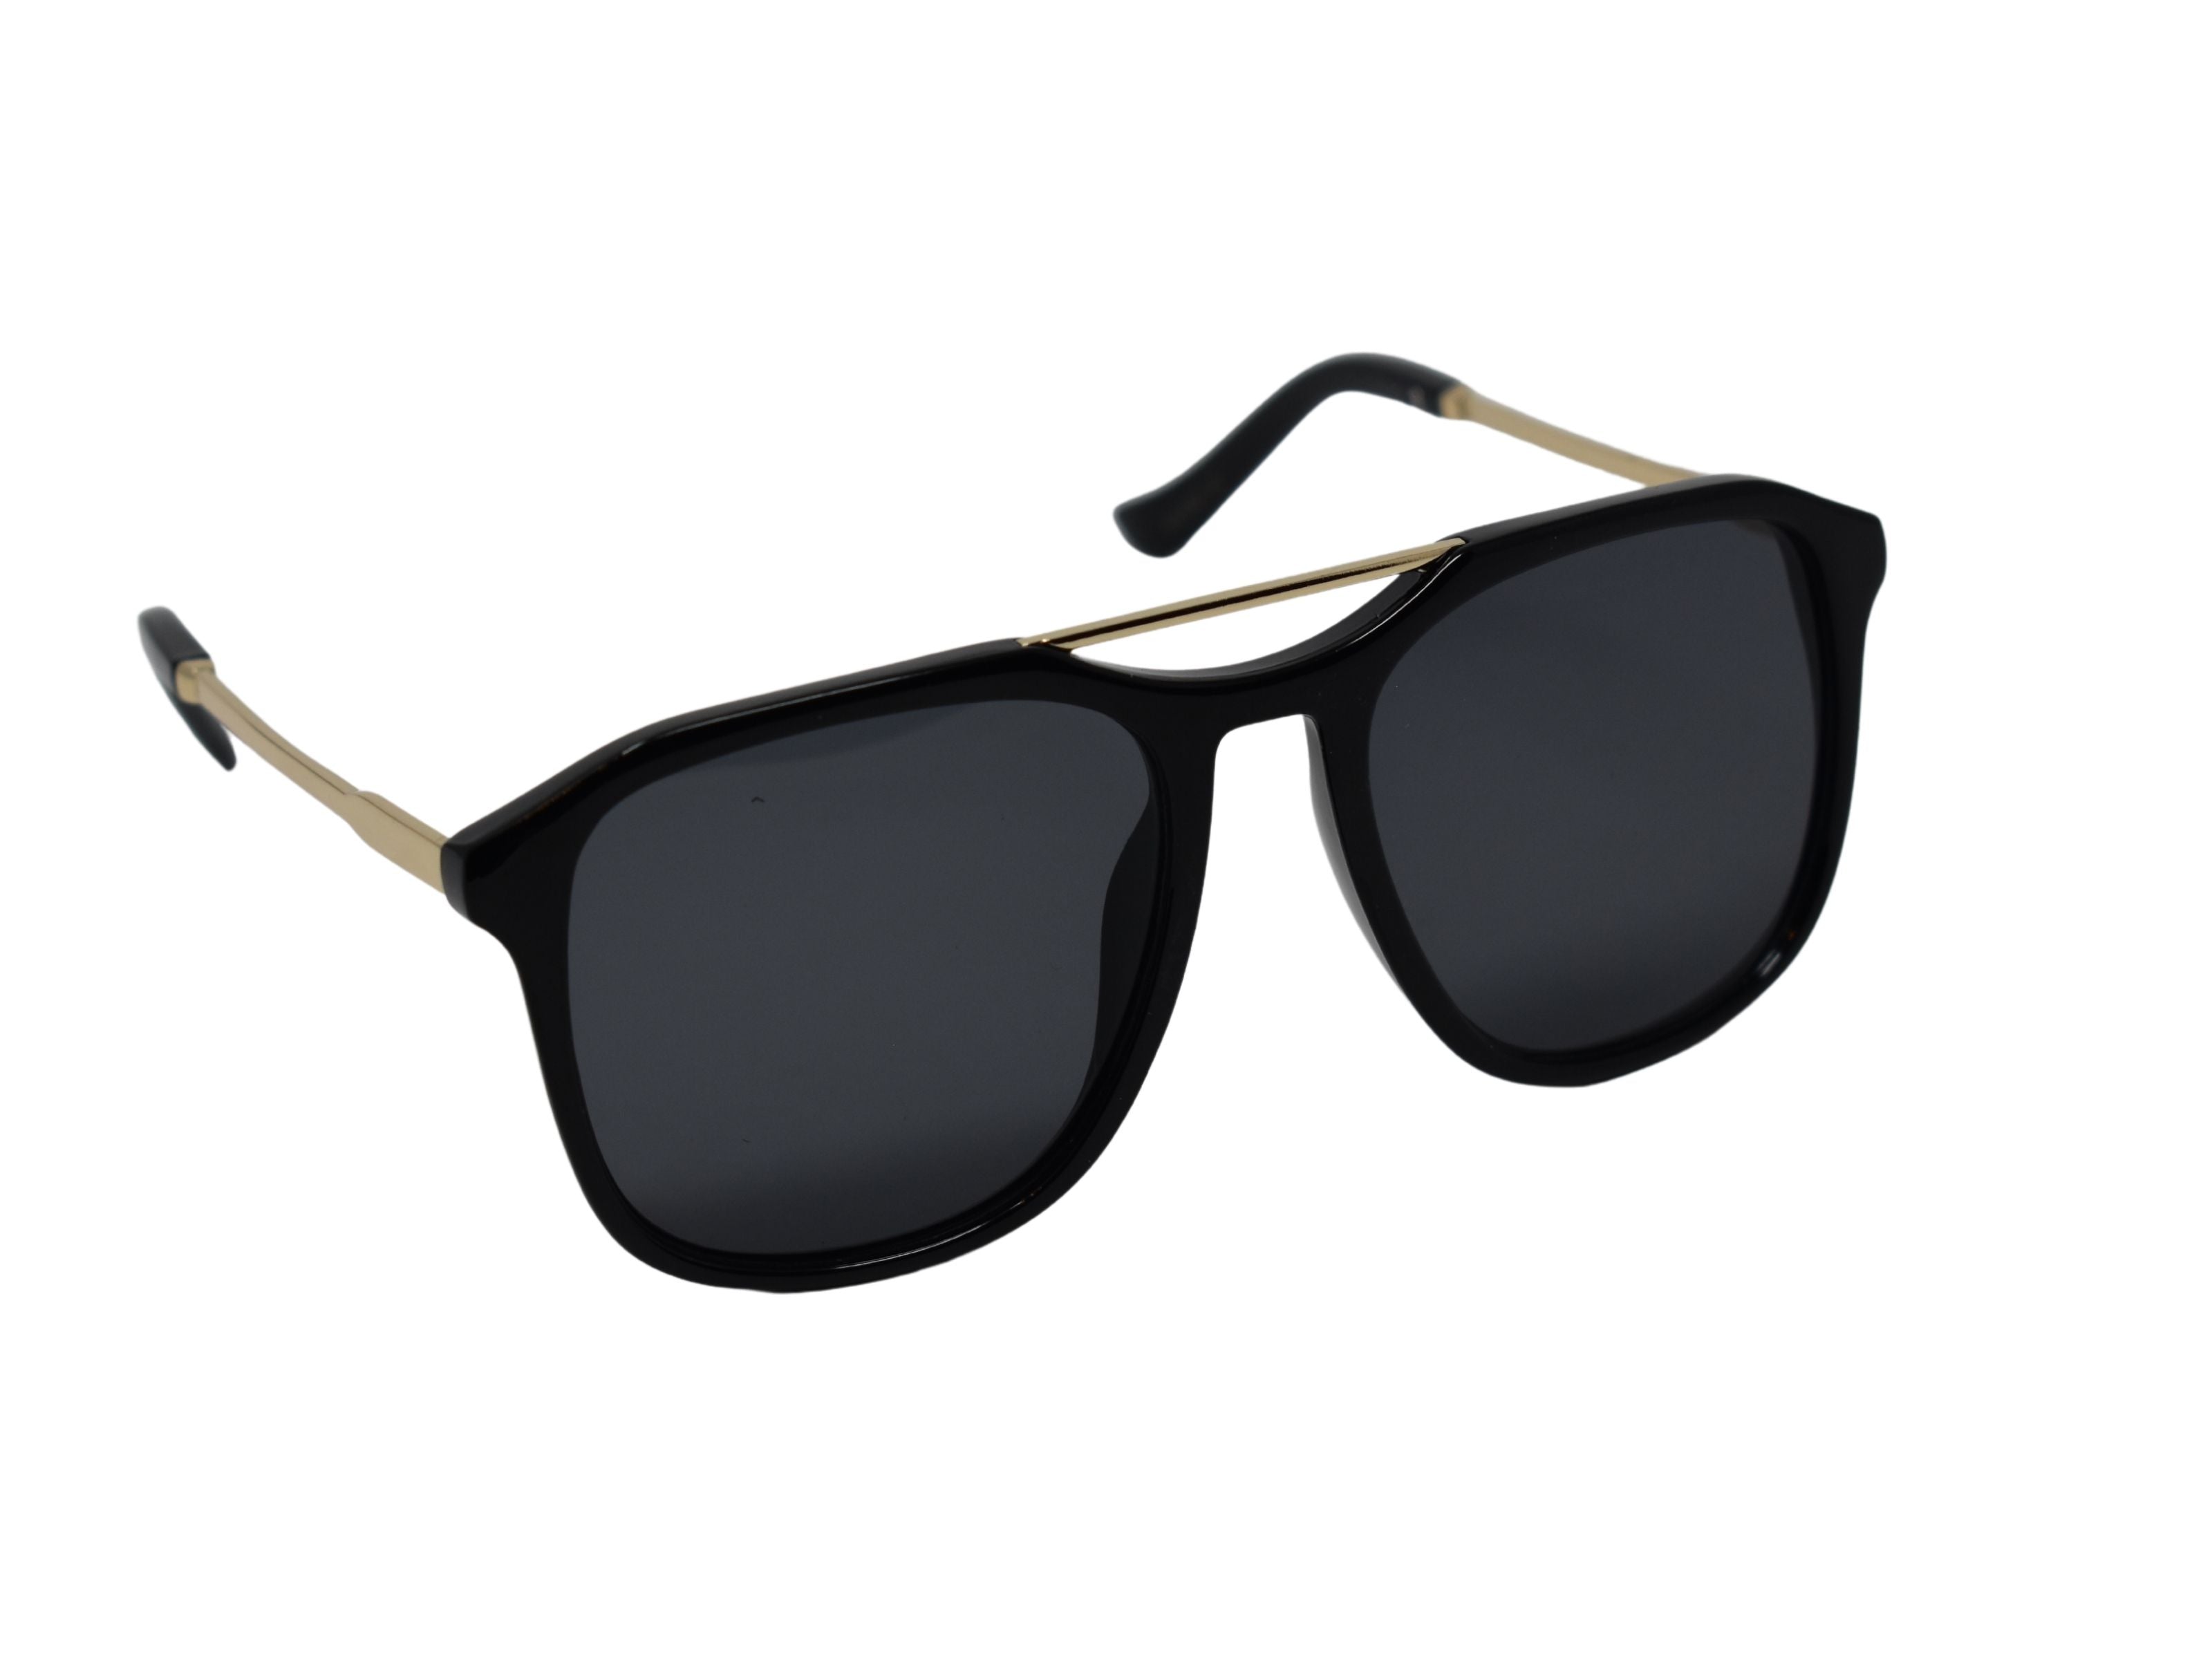 Bring an instant chic appeal with our stylish Breita Black aviator sunglasses.